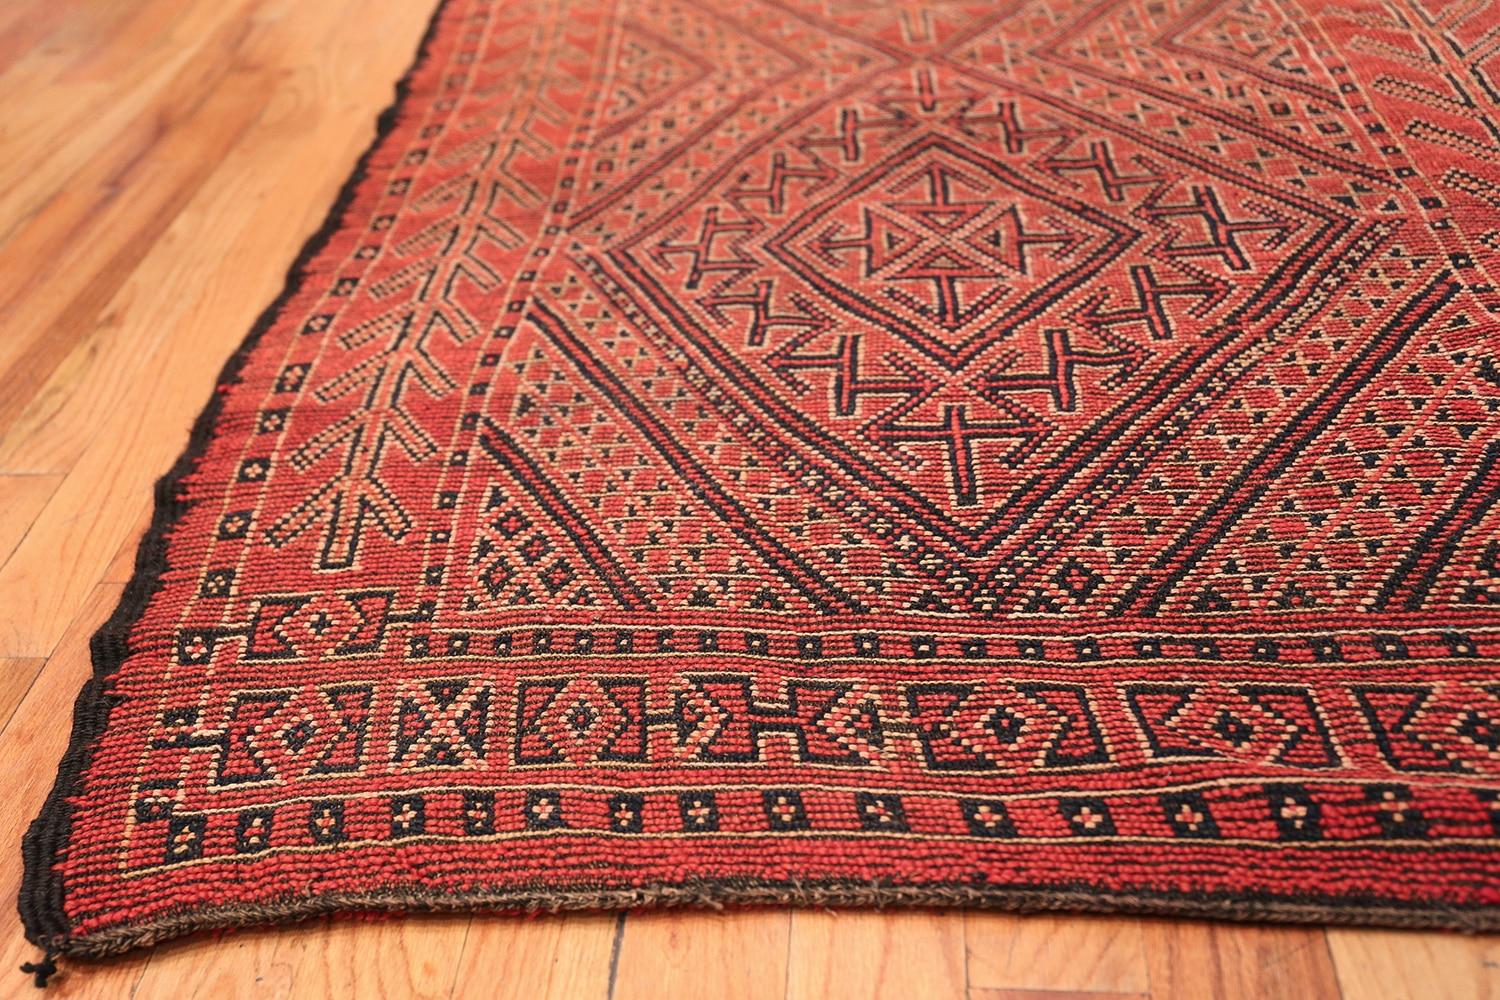 Breathtaking Double Sided Vintage Red Berber Moroccan Rug,  Country of Origin / Rug Type: Morocco, Circa date: Mid – 20th Century. Size: 7 ft x 8 ft 7 in (2.13 m x 2.62 m). 